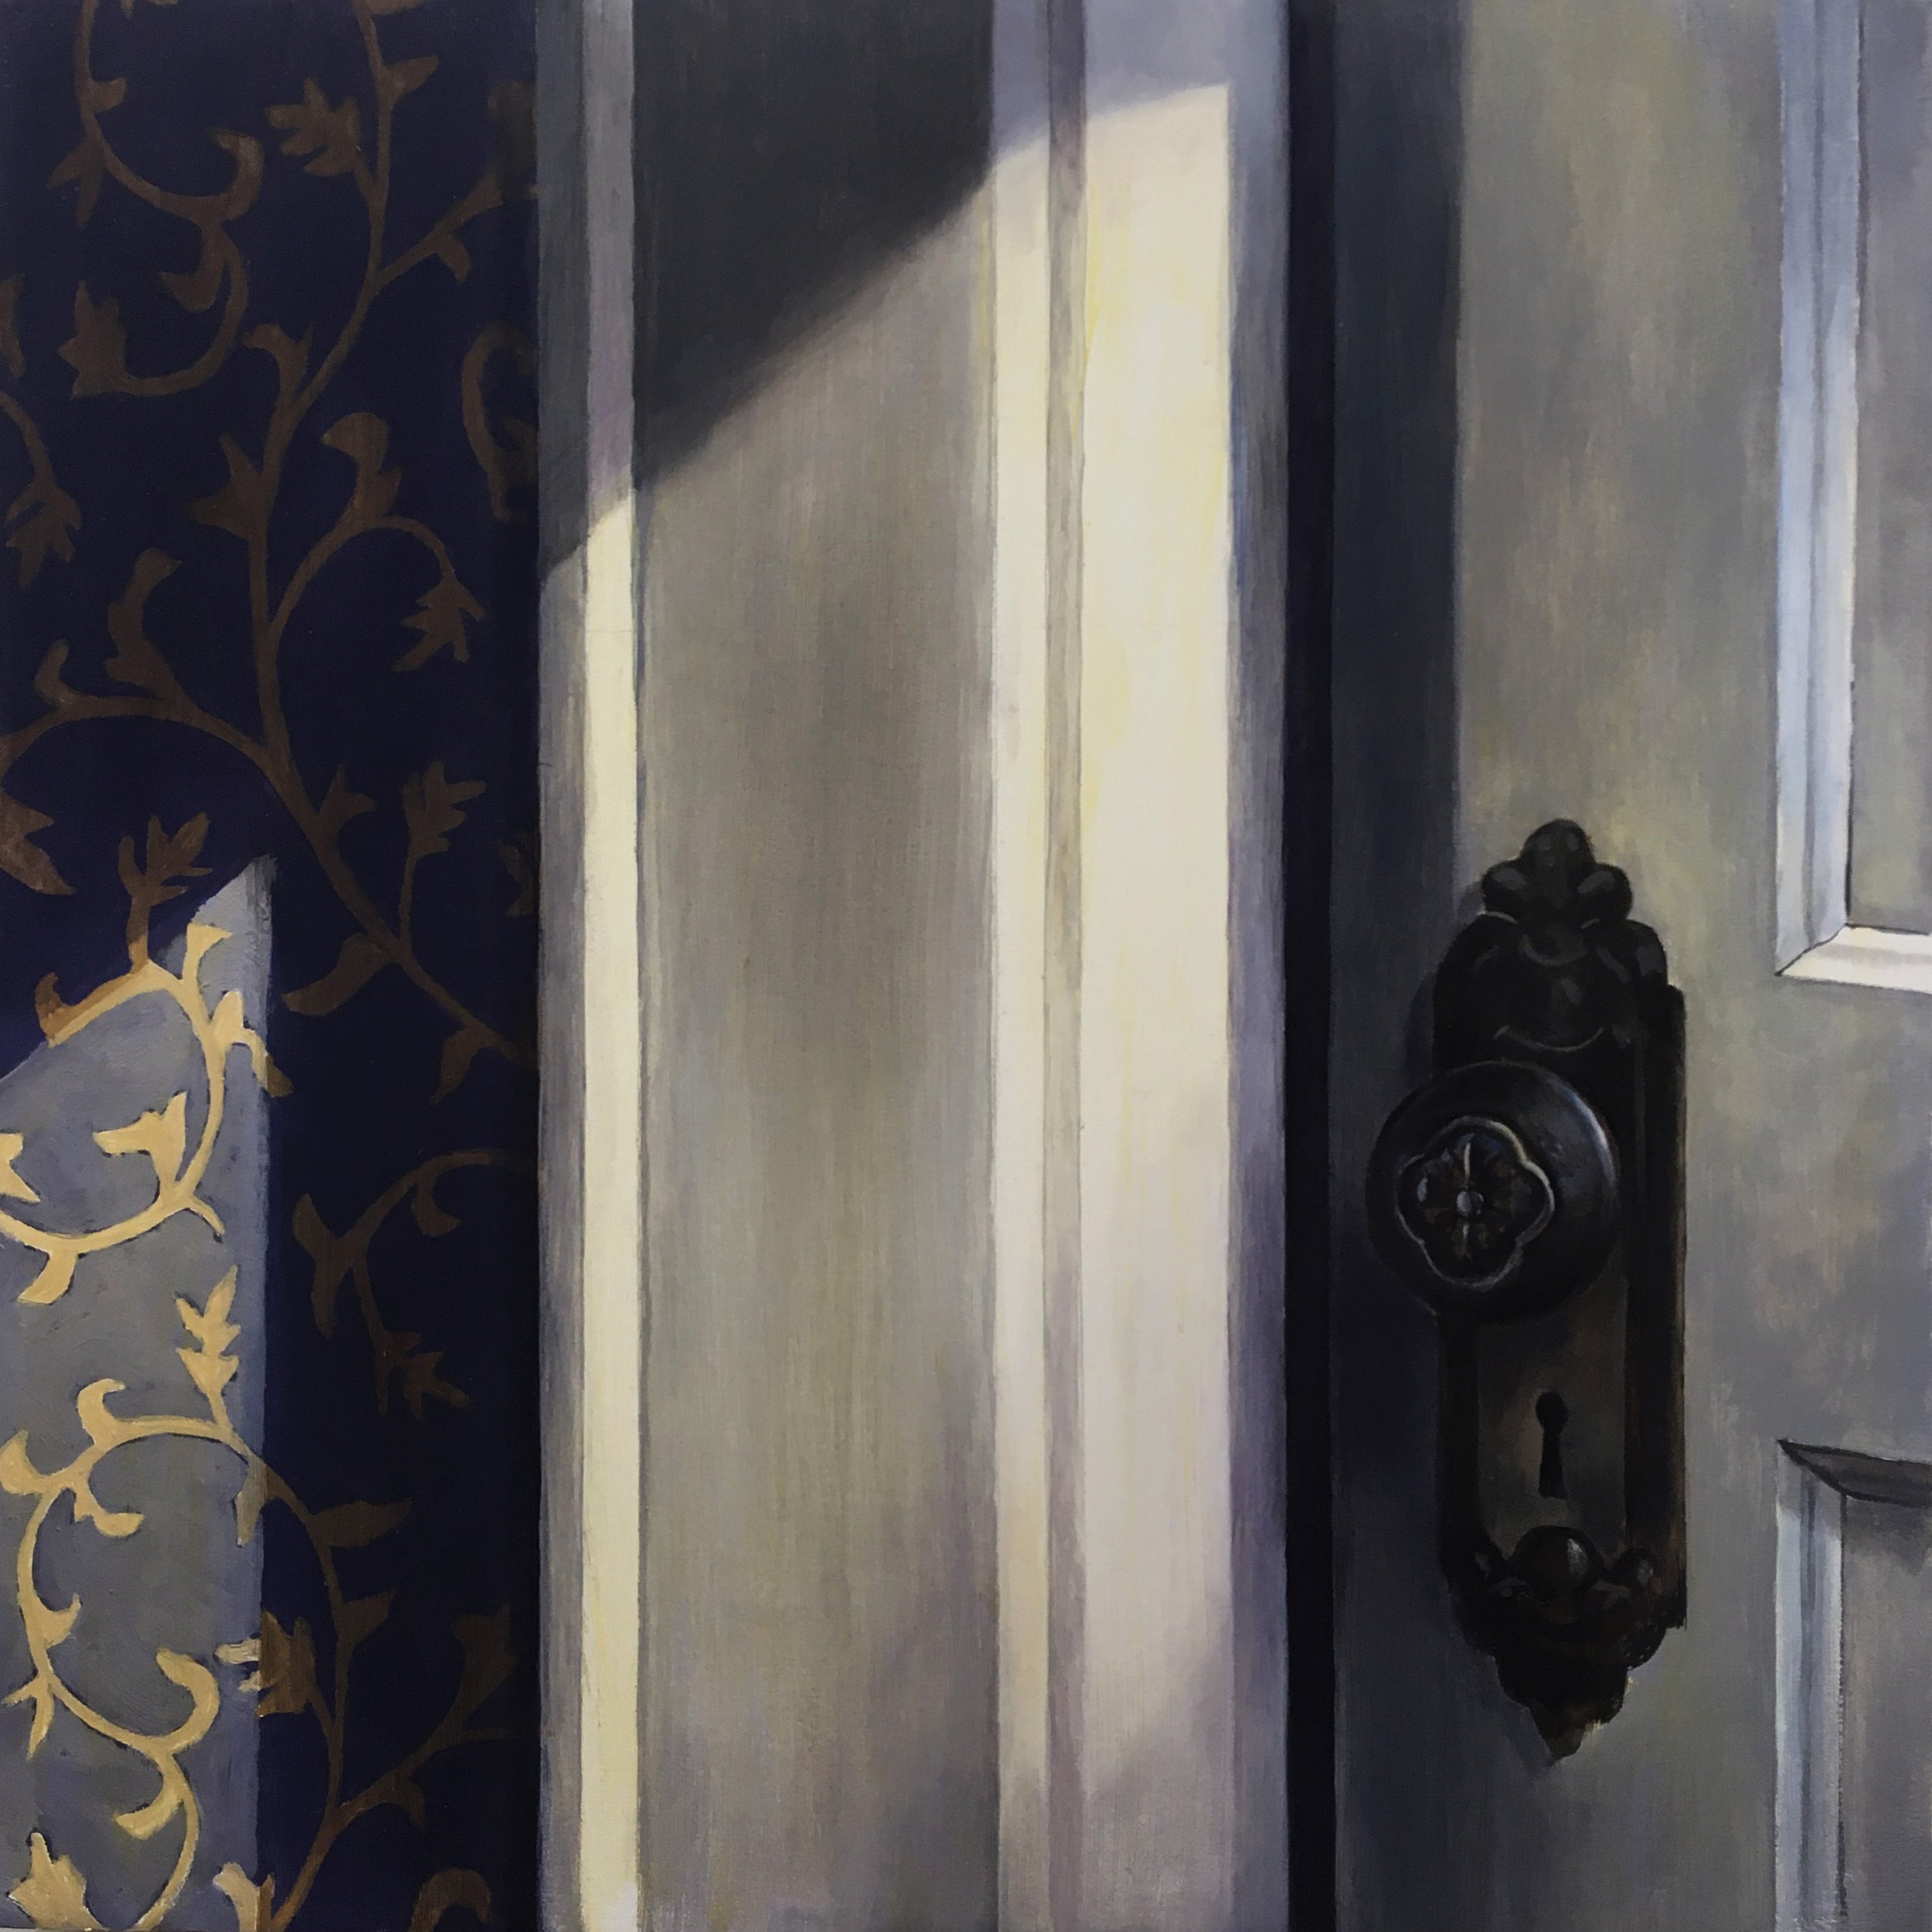   Sunlight on Wallpaper and Door   2020  Oil on panel  10 x 10 inches   